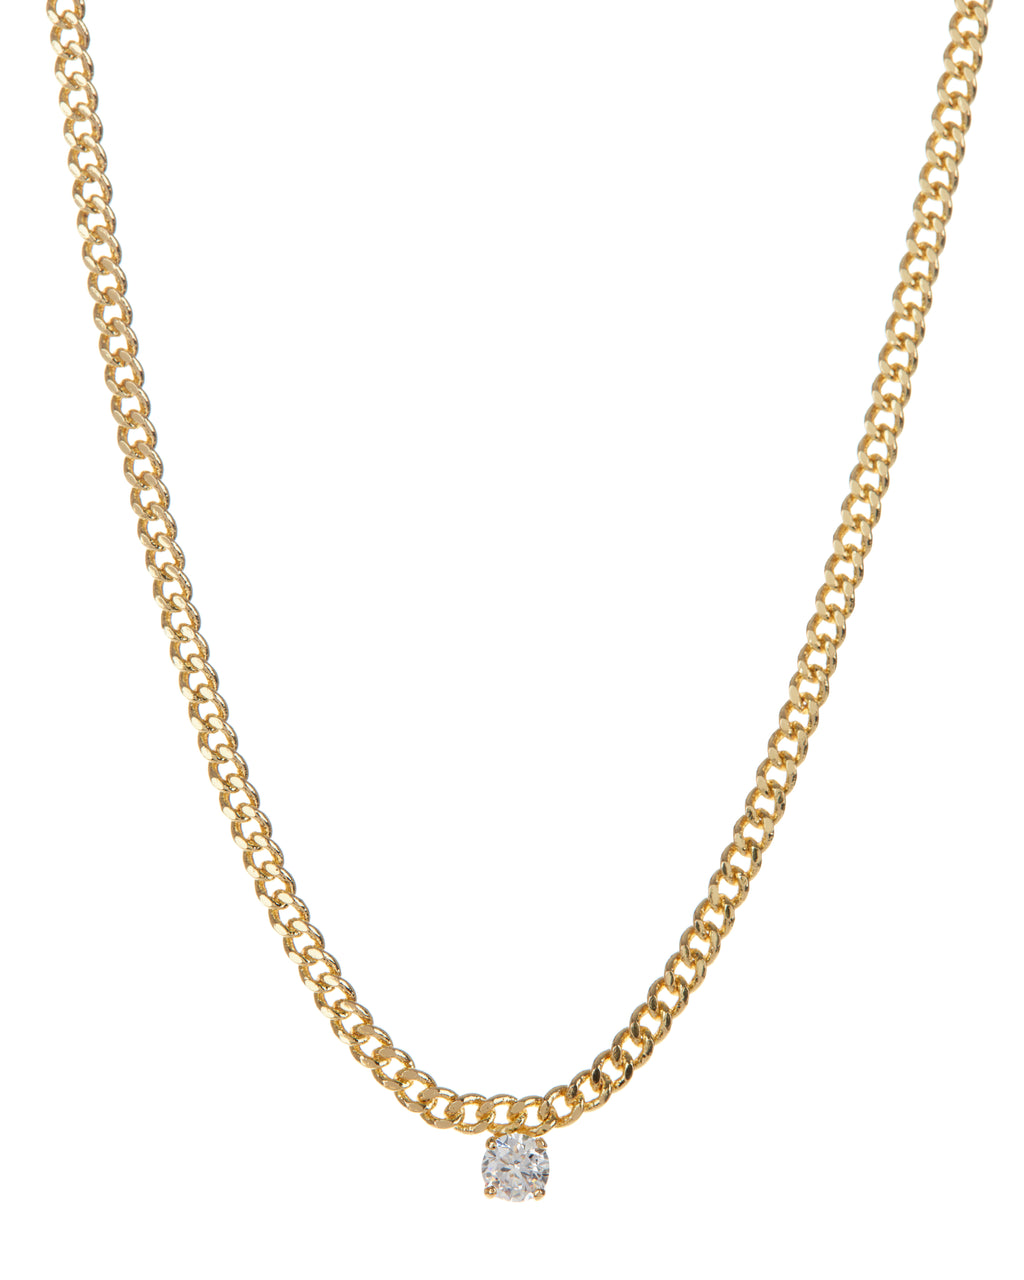 Bardot Stud Charm Necklace in Gold